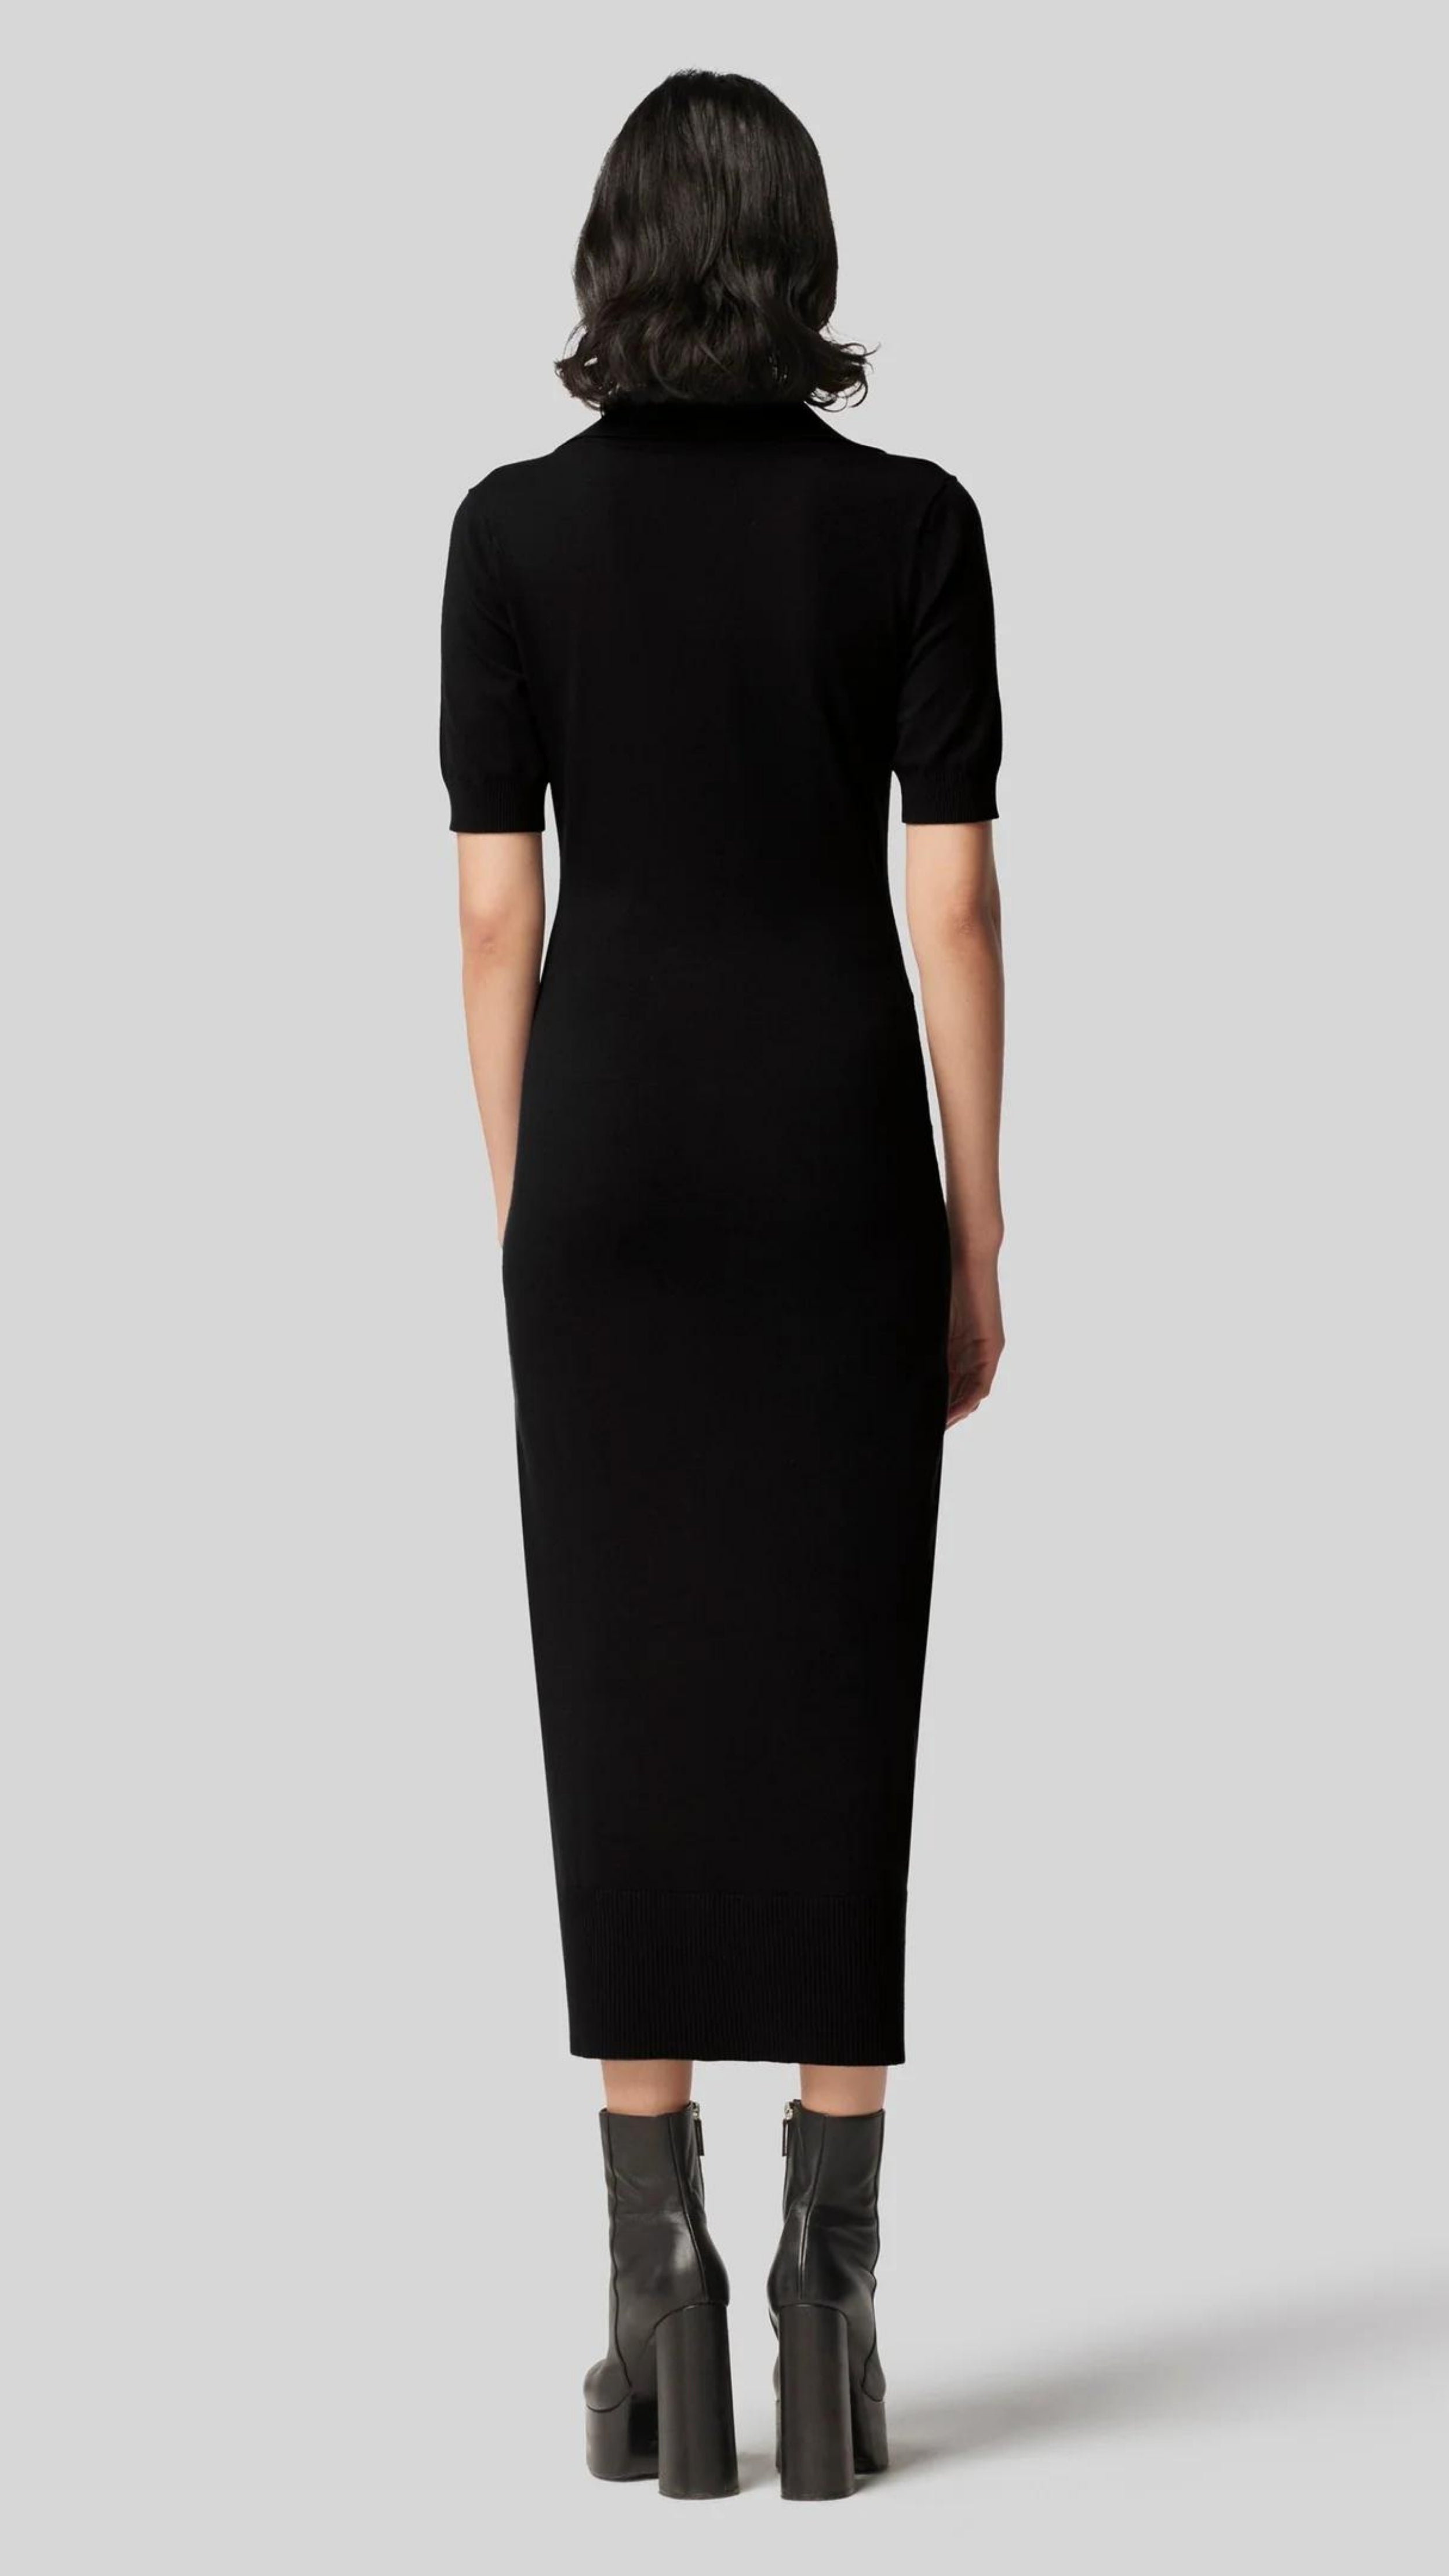 Altruzarra Hestia Dress in Black. A lightweight, super soft knit dress. Body fitting with gold buttons from front top to bottom. Midi length, shirt collar and half short sleeves. Black. Shown on model from back view. Available at experience 27 in Madrid Spain.